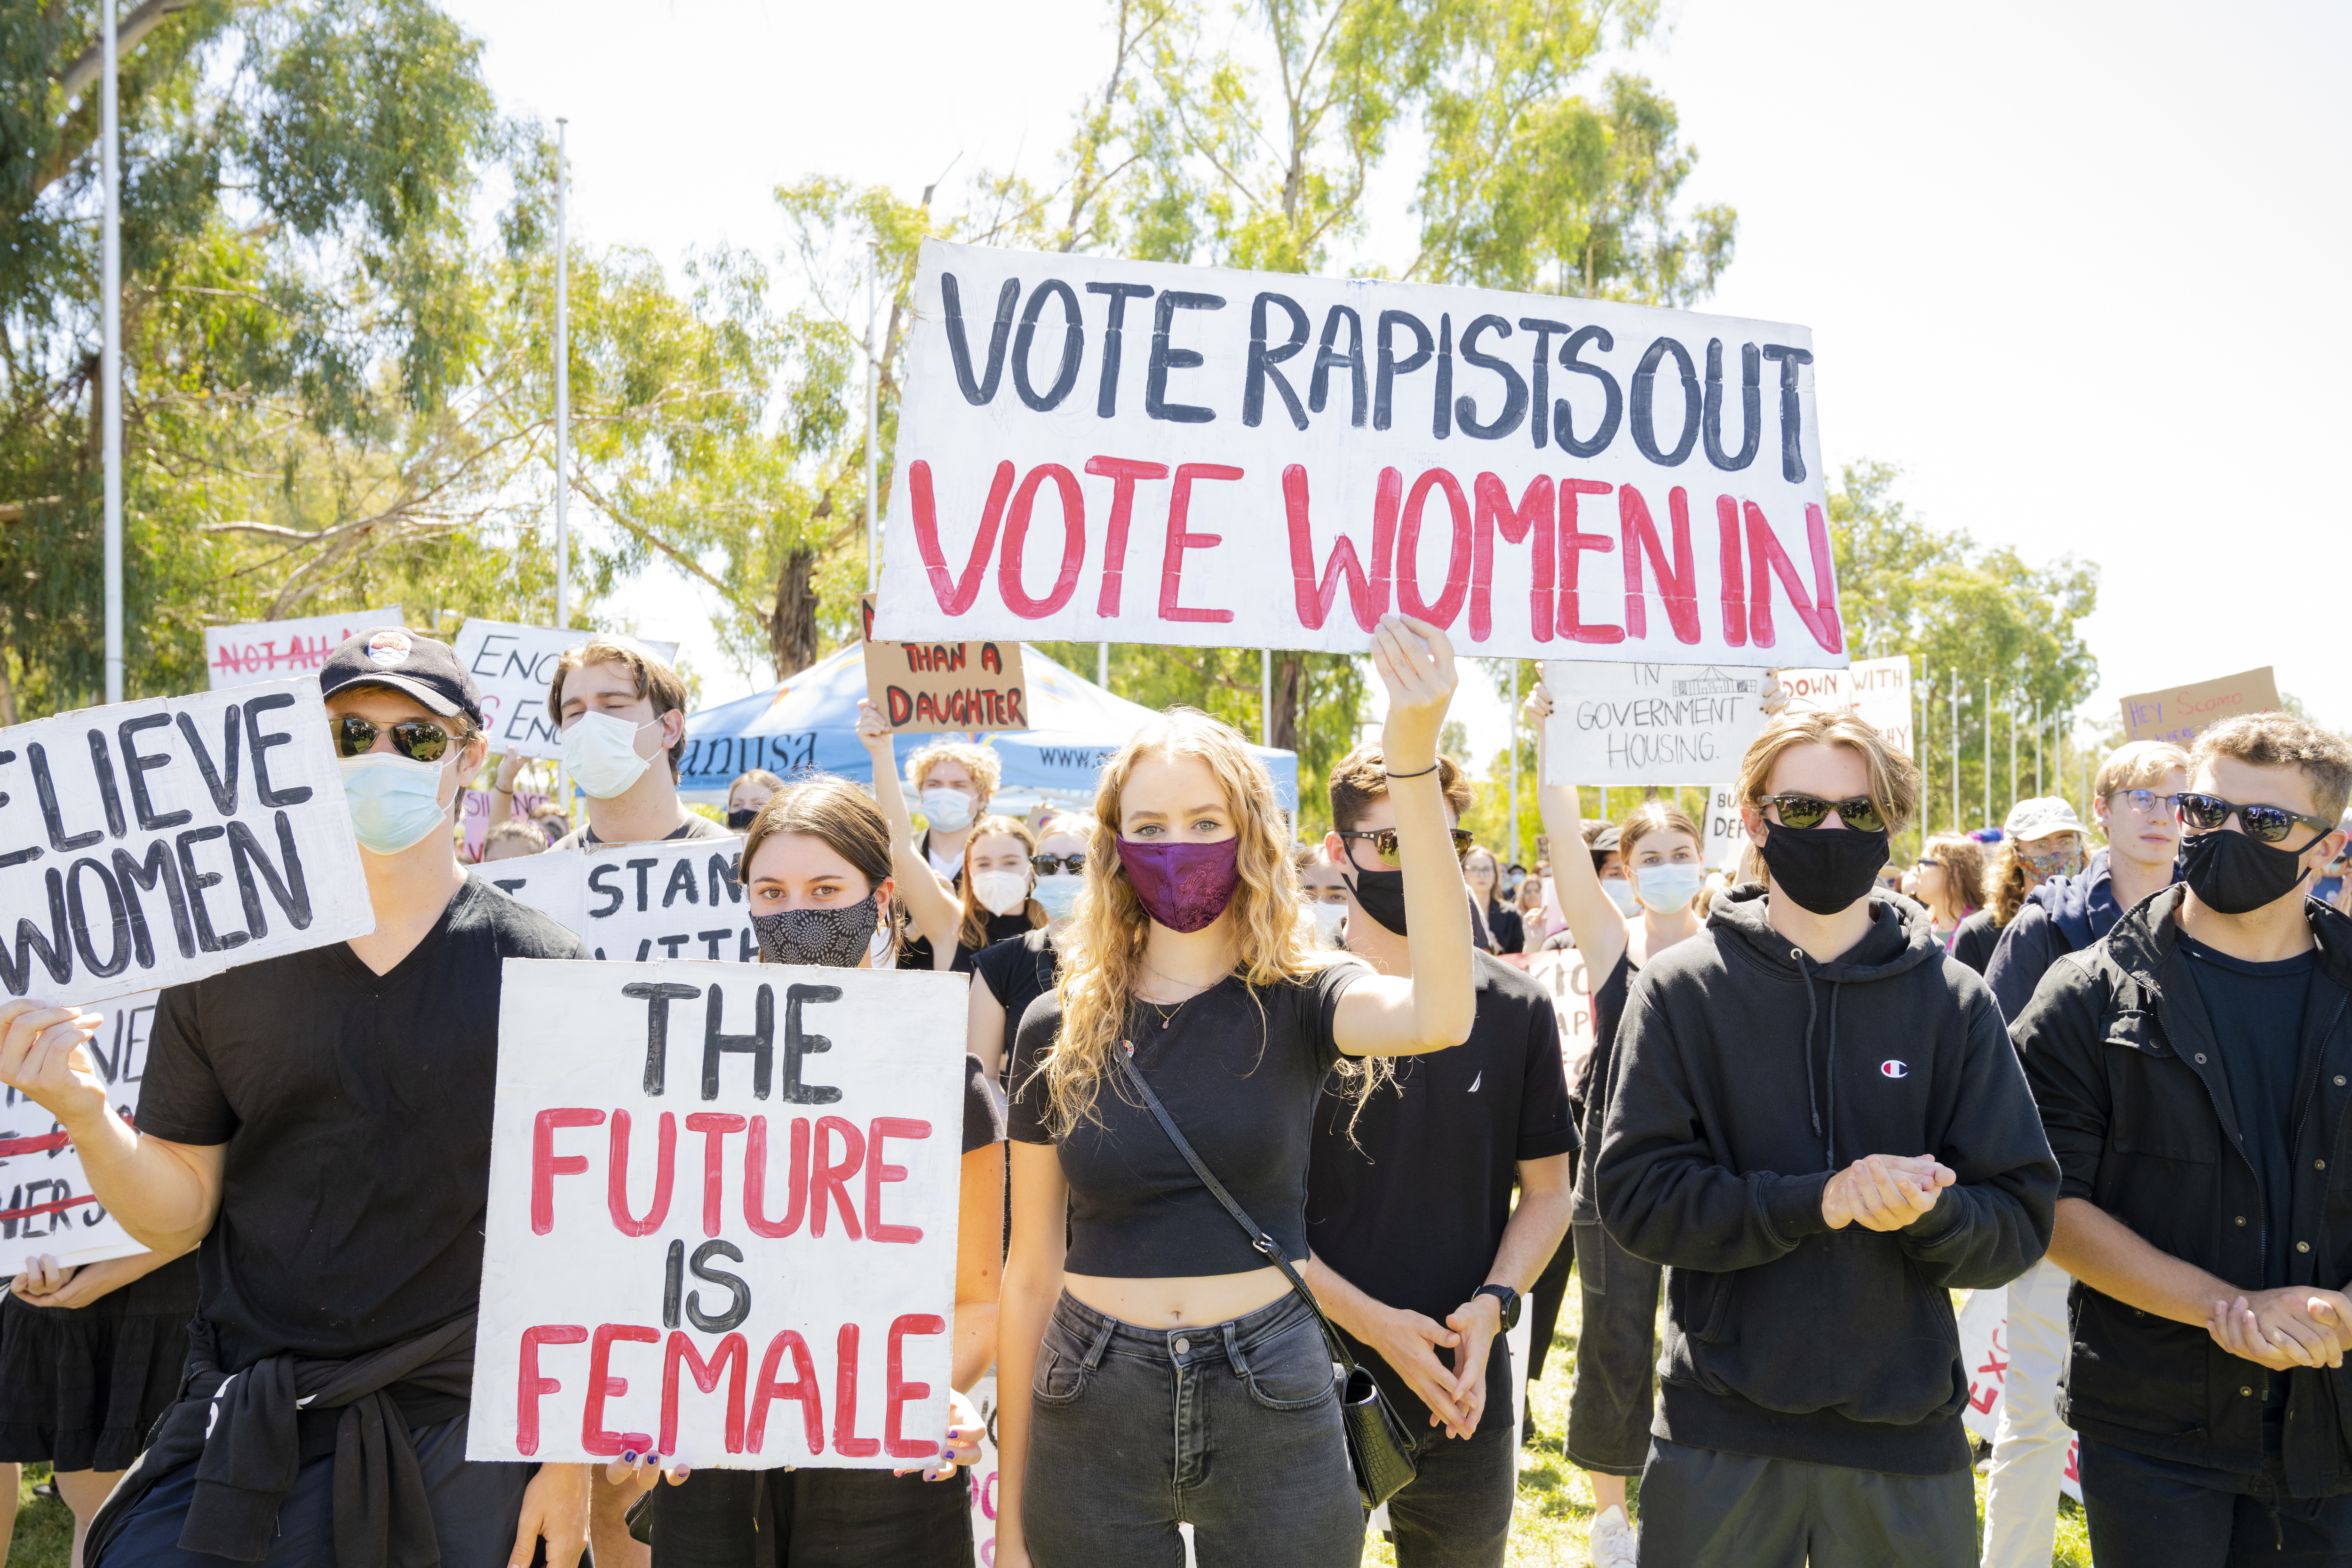 Protesters attend "March 4 Justice' rallies across Australia in the call for action against gender-based violence following rape allegations involving members of parliament. 